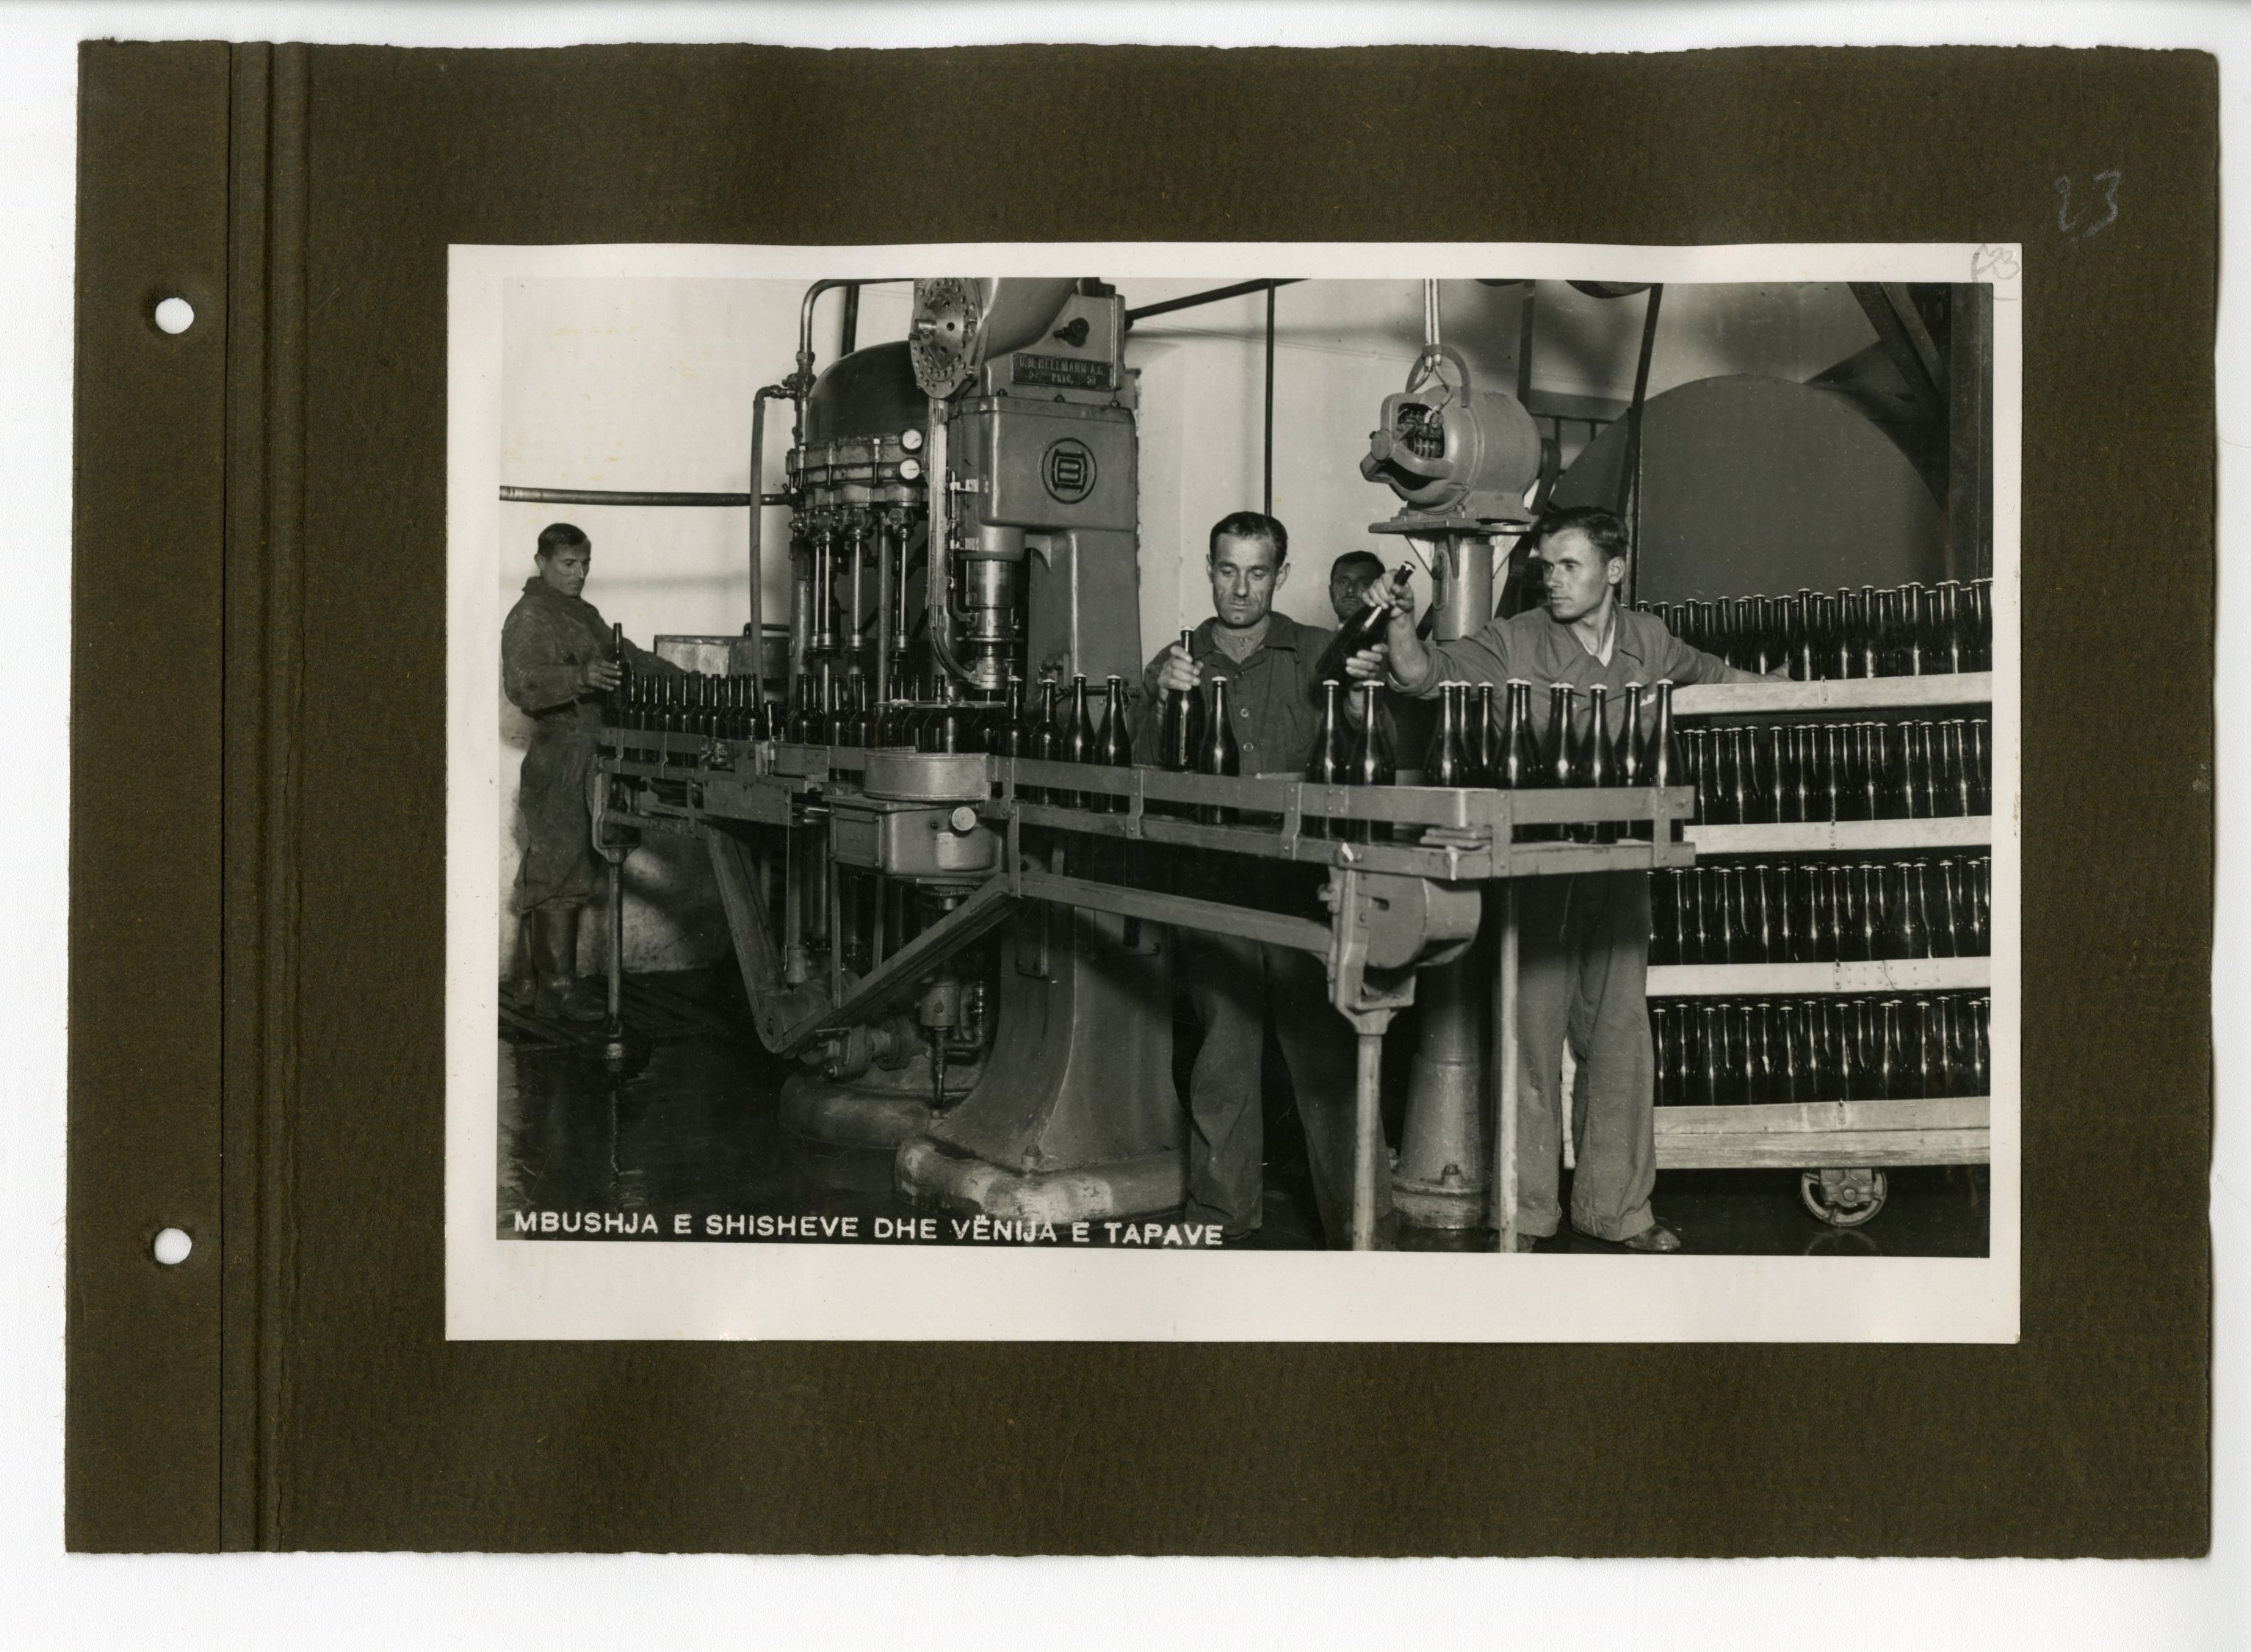 Workers and machines bottling beer at Korça Beer Brewery (after 1934 - before 1944) - Photographic Studio MAK - National Museum of Albania (prior to 1944)